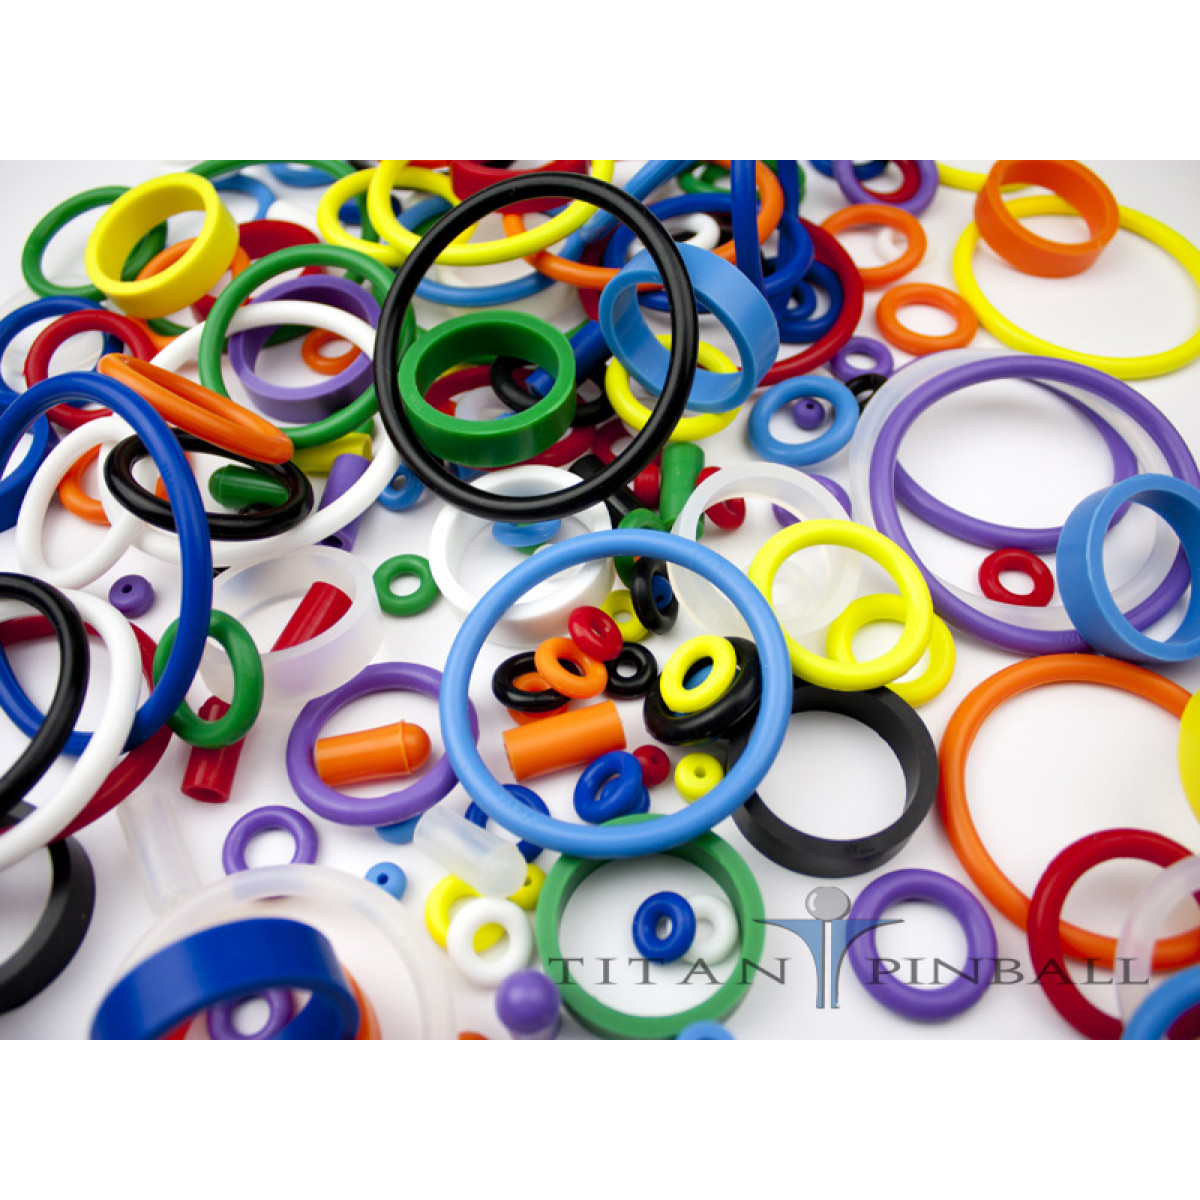 PerfectPlay Silicone Flipper Rubber in Standard Size